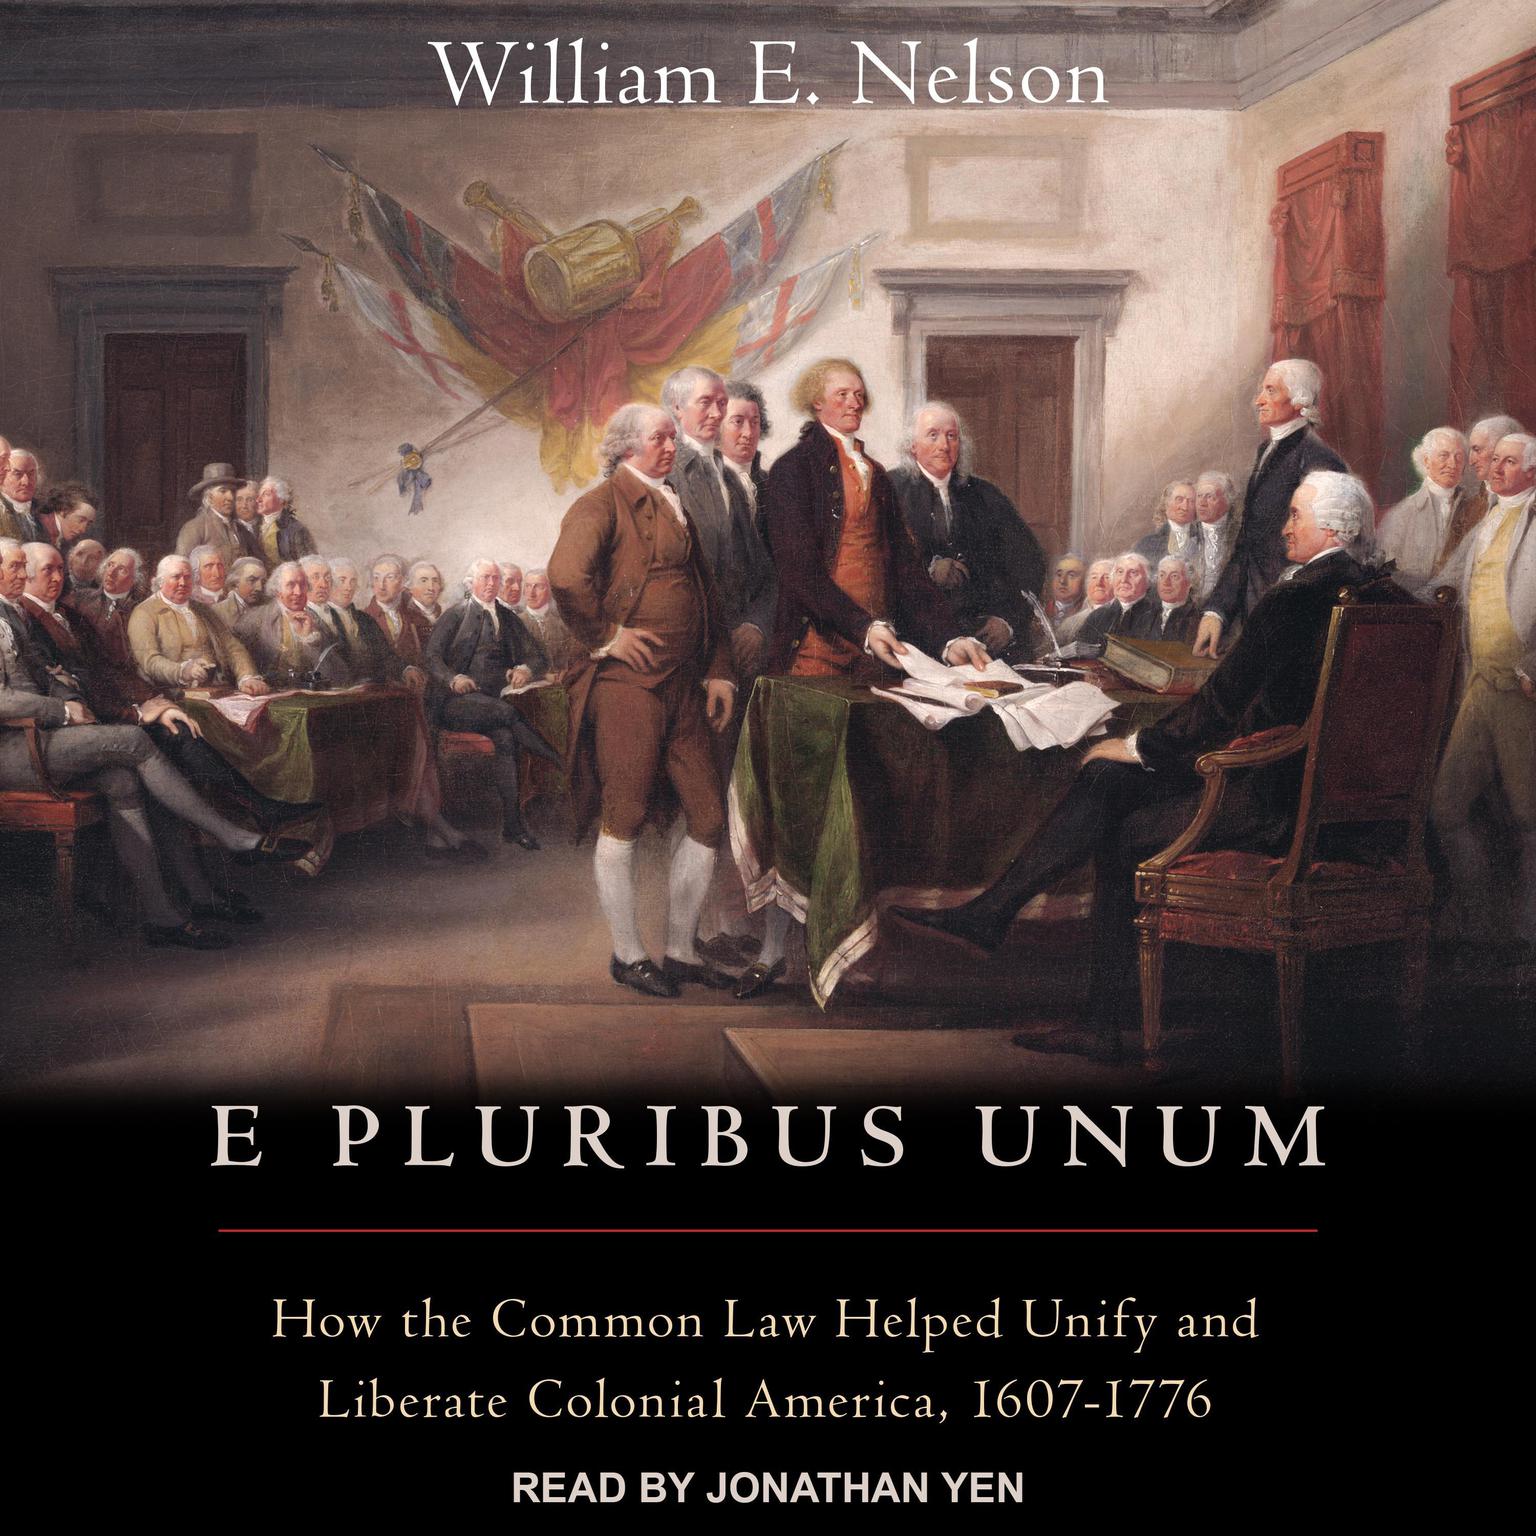 E Pluribus Unum: How the Common Law Helped Unify and Liberate Colonial America, 1607-1776 Audiobook, by William E. Nelson